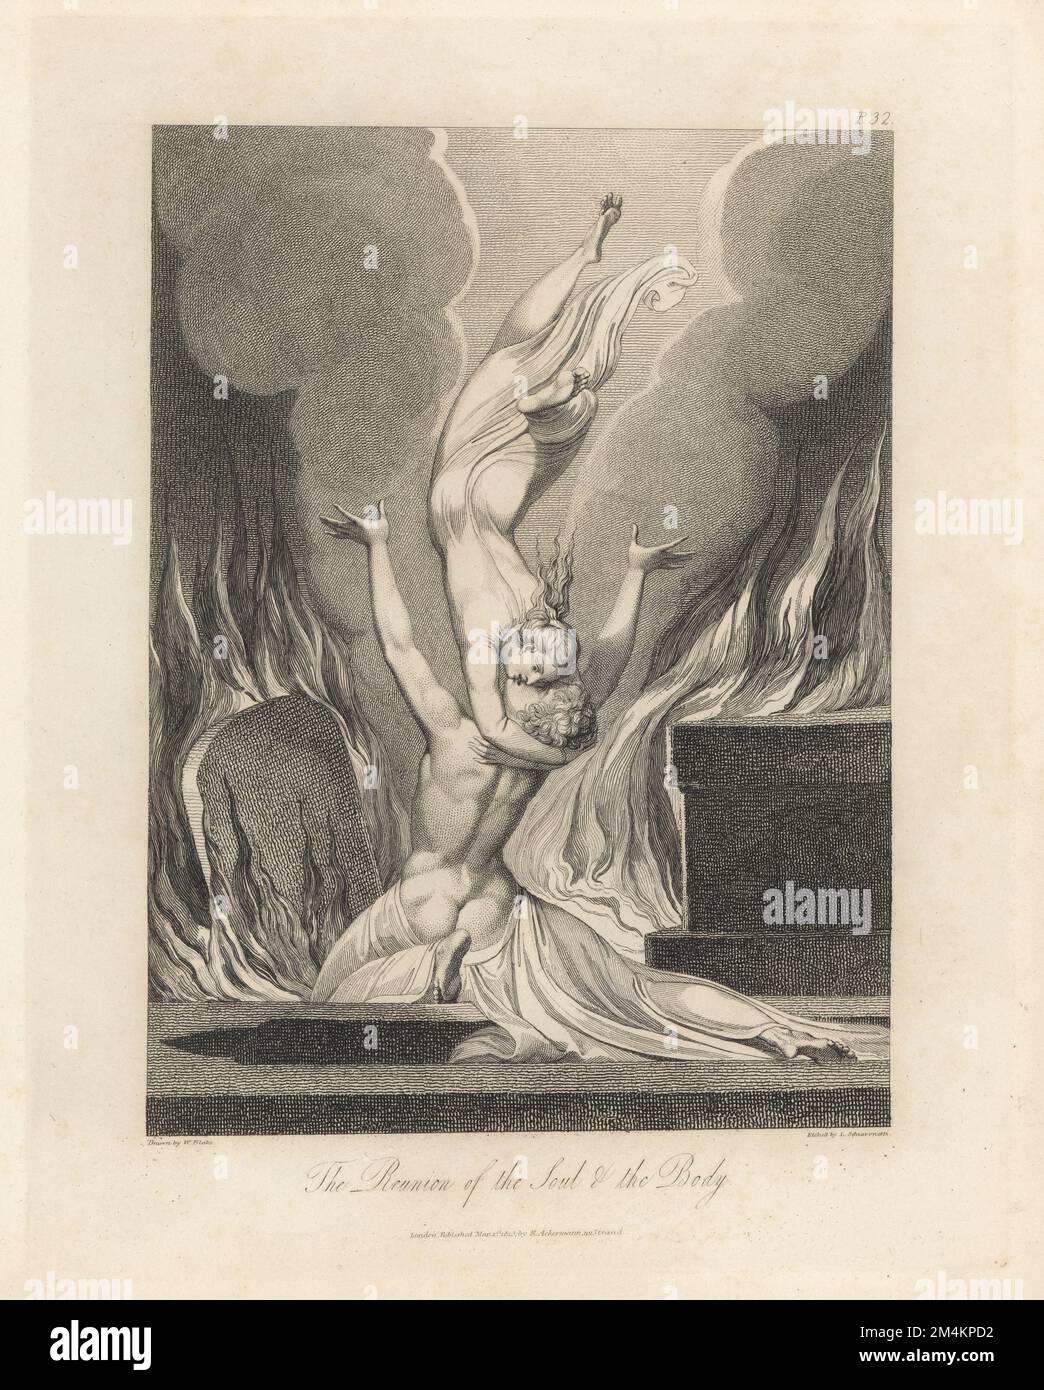 The Reunion of the Soul and the Body (Plate X). A male figure embraced by a shrouded woman spirit diving from above. Flames and smoke billow from a tomb and gravestone. Copperplate engraving by Louis Schiavonetti after an original drawing by William Blake from Robert Blair’s The Grave, T. Bensley for Rudolph Ackermann, 1813. Stock Photo